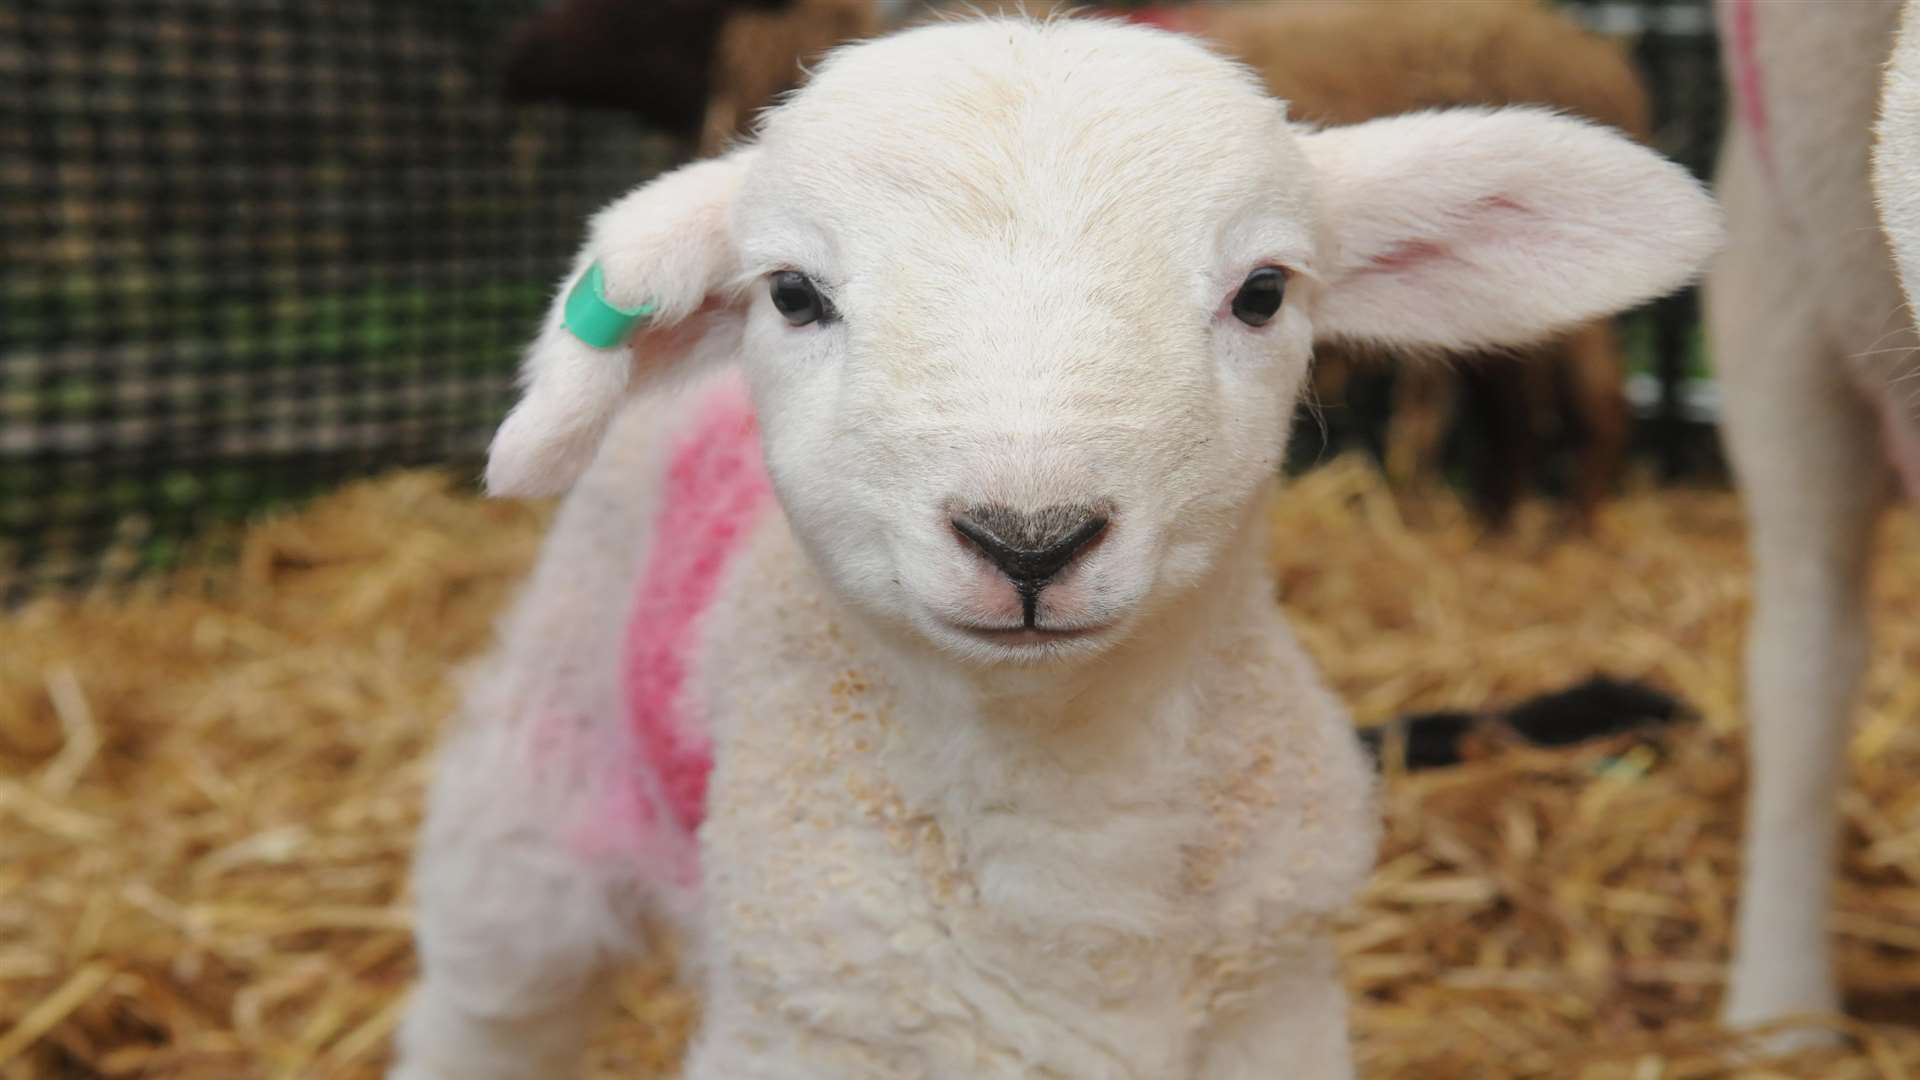 A new arrival at the Rare Breeds Centre in Woodchurch